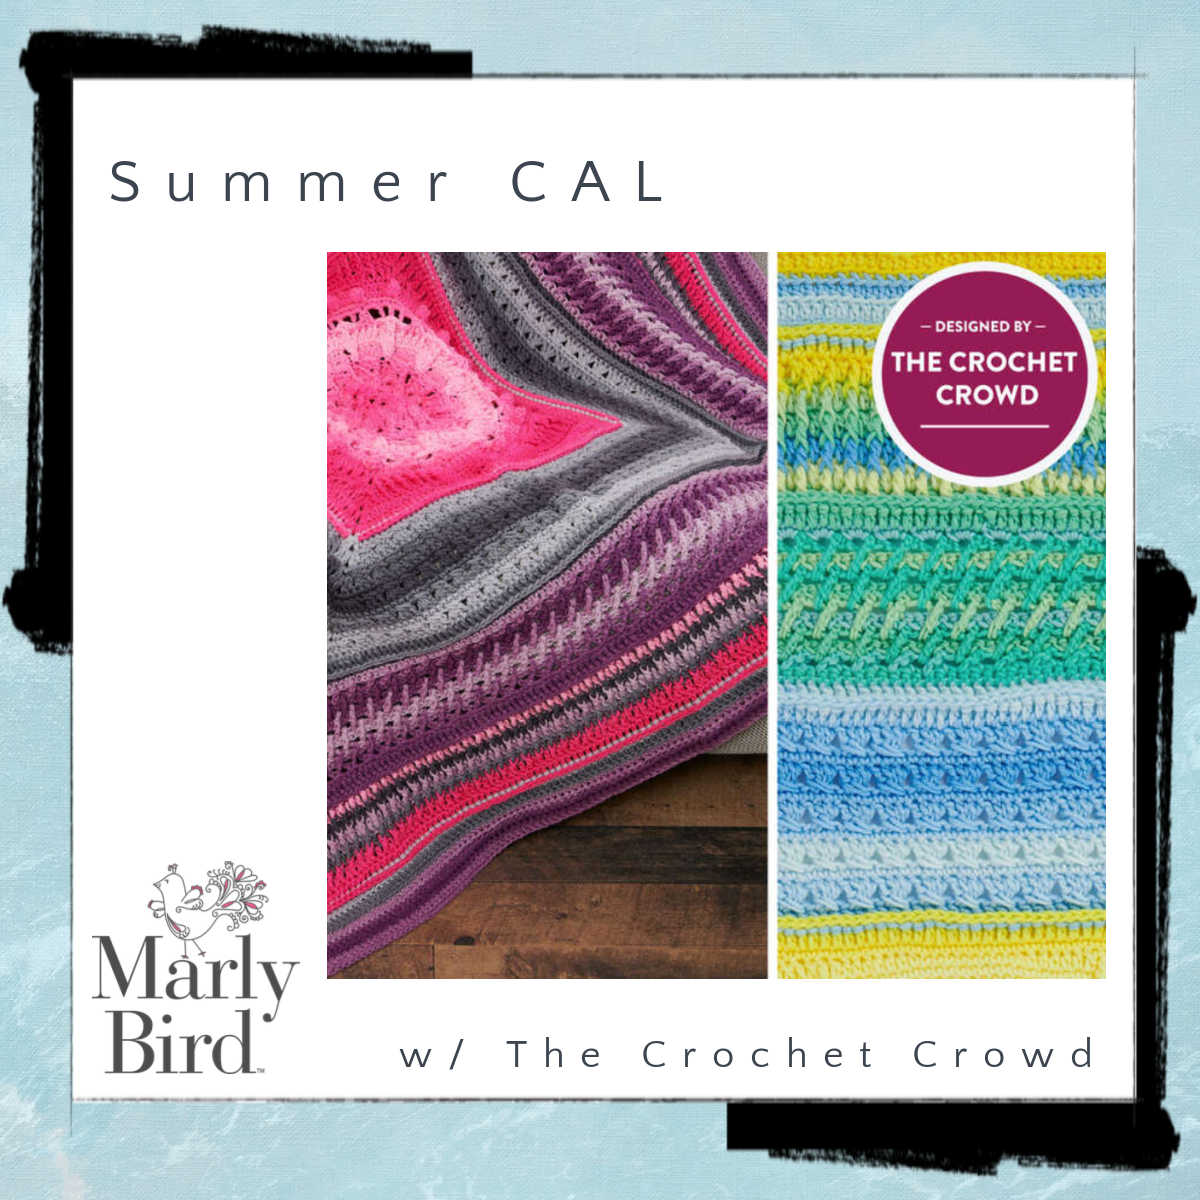 summer cal with crochet crowd